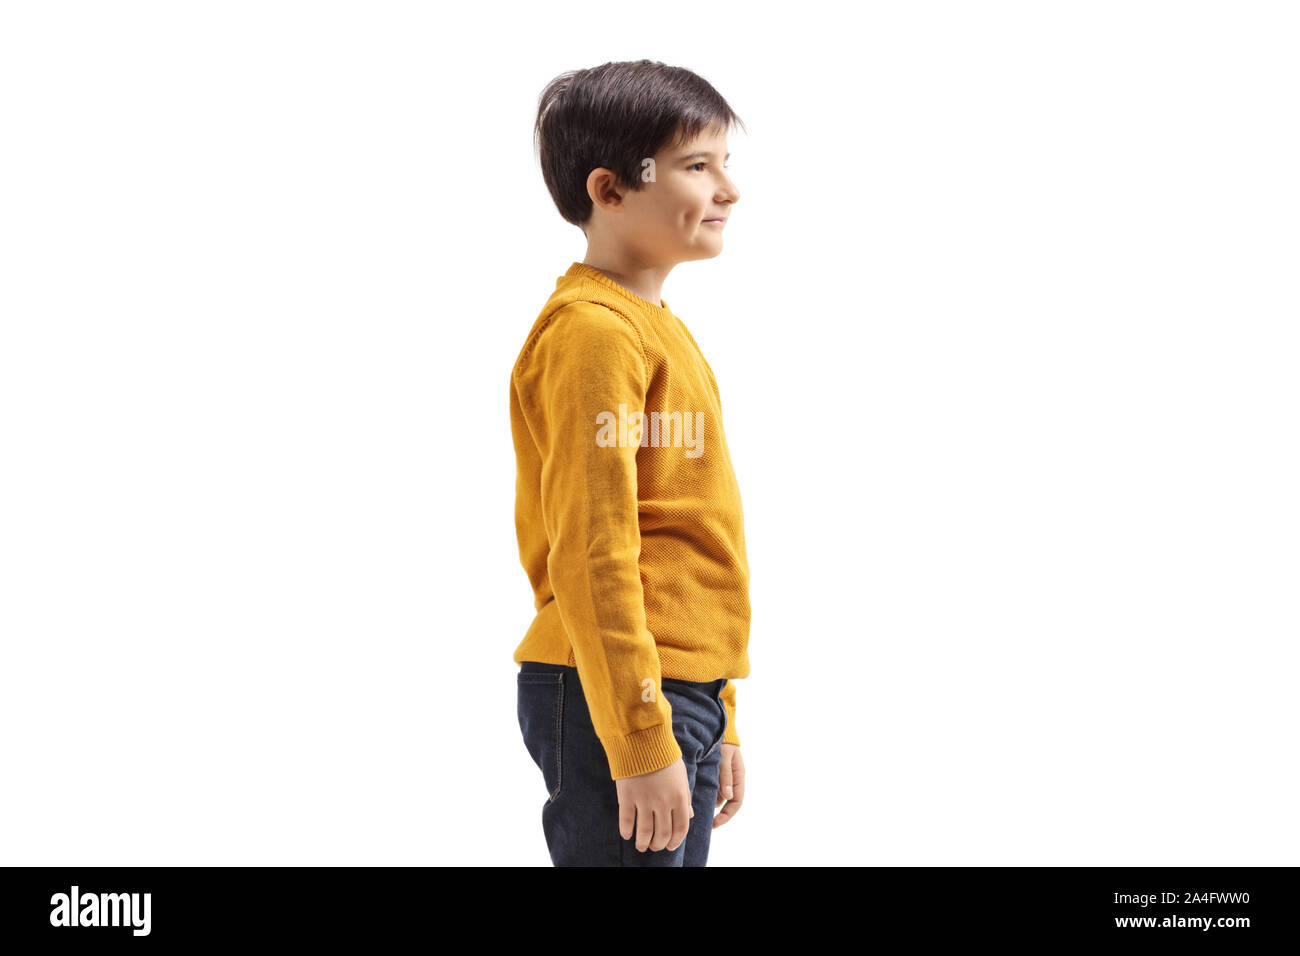 Profile shot of a boy in a yellow jumper isolated on white background Stock Photo